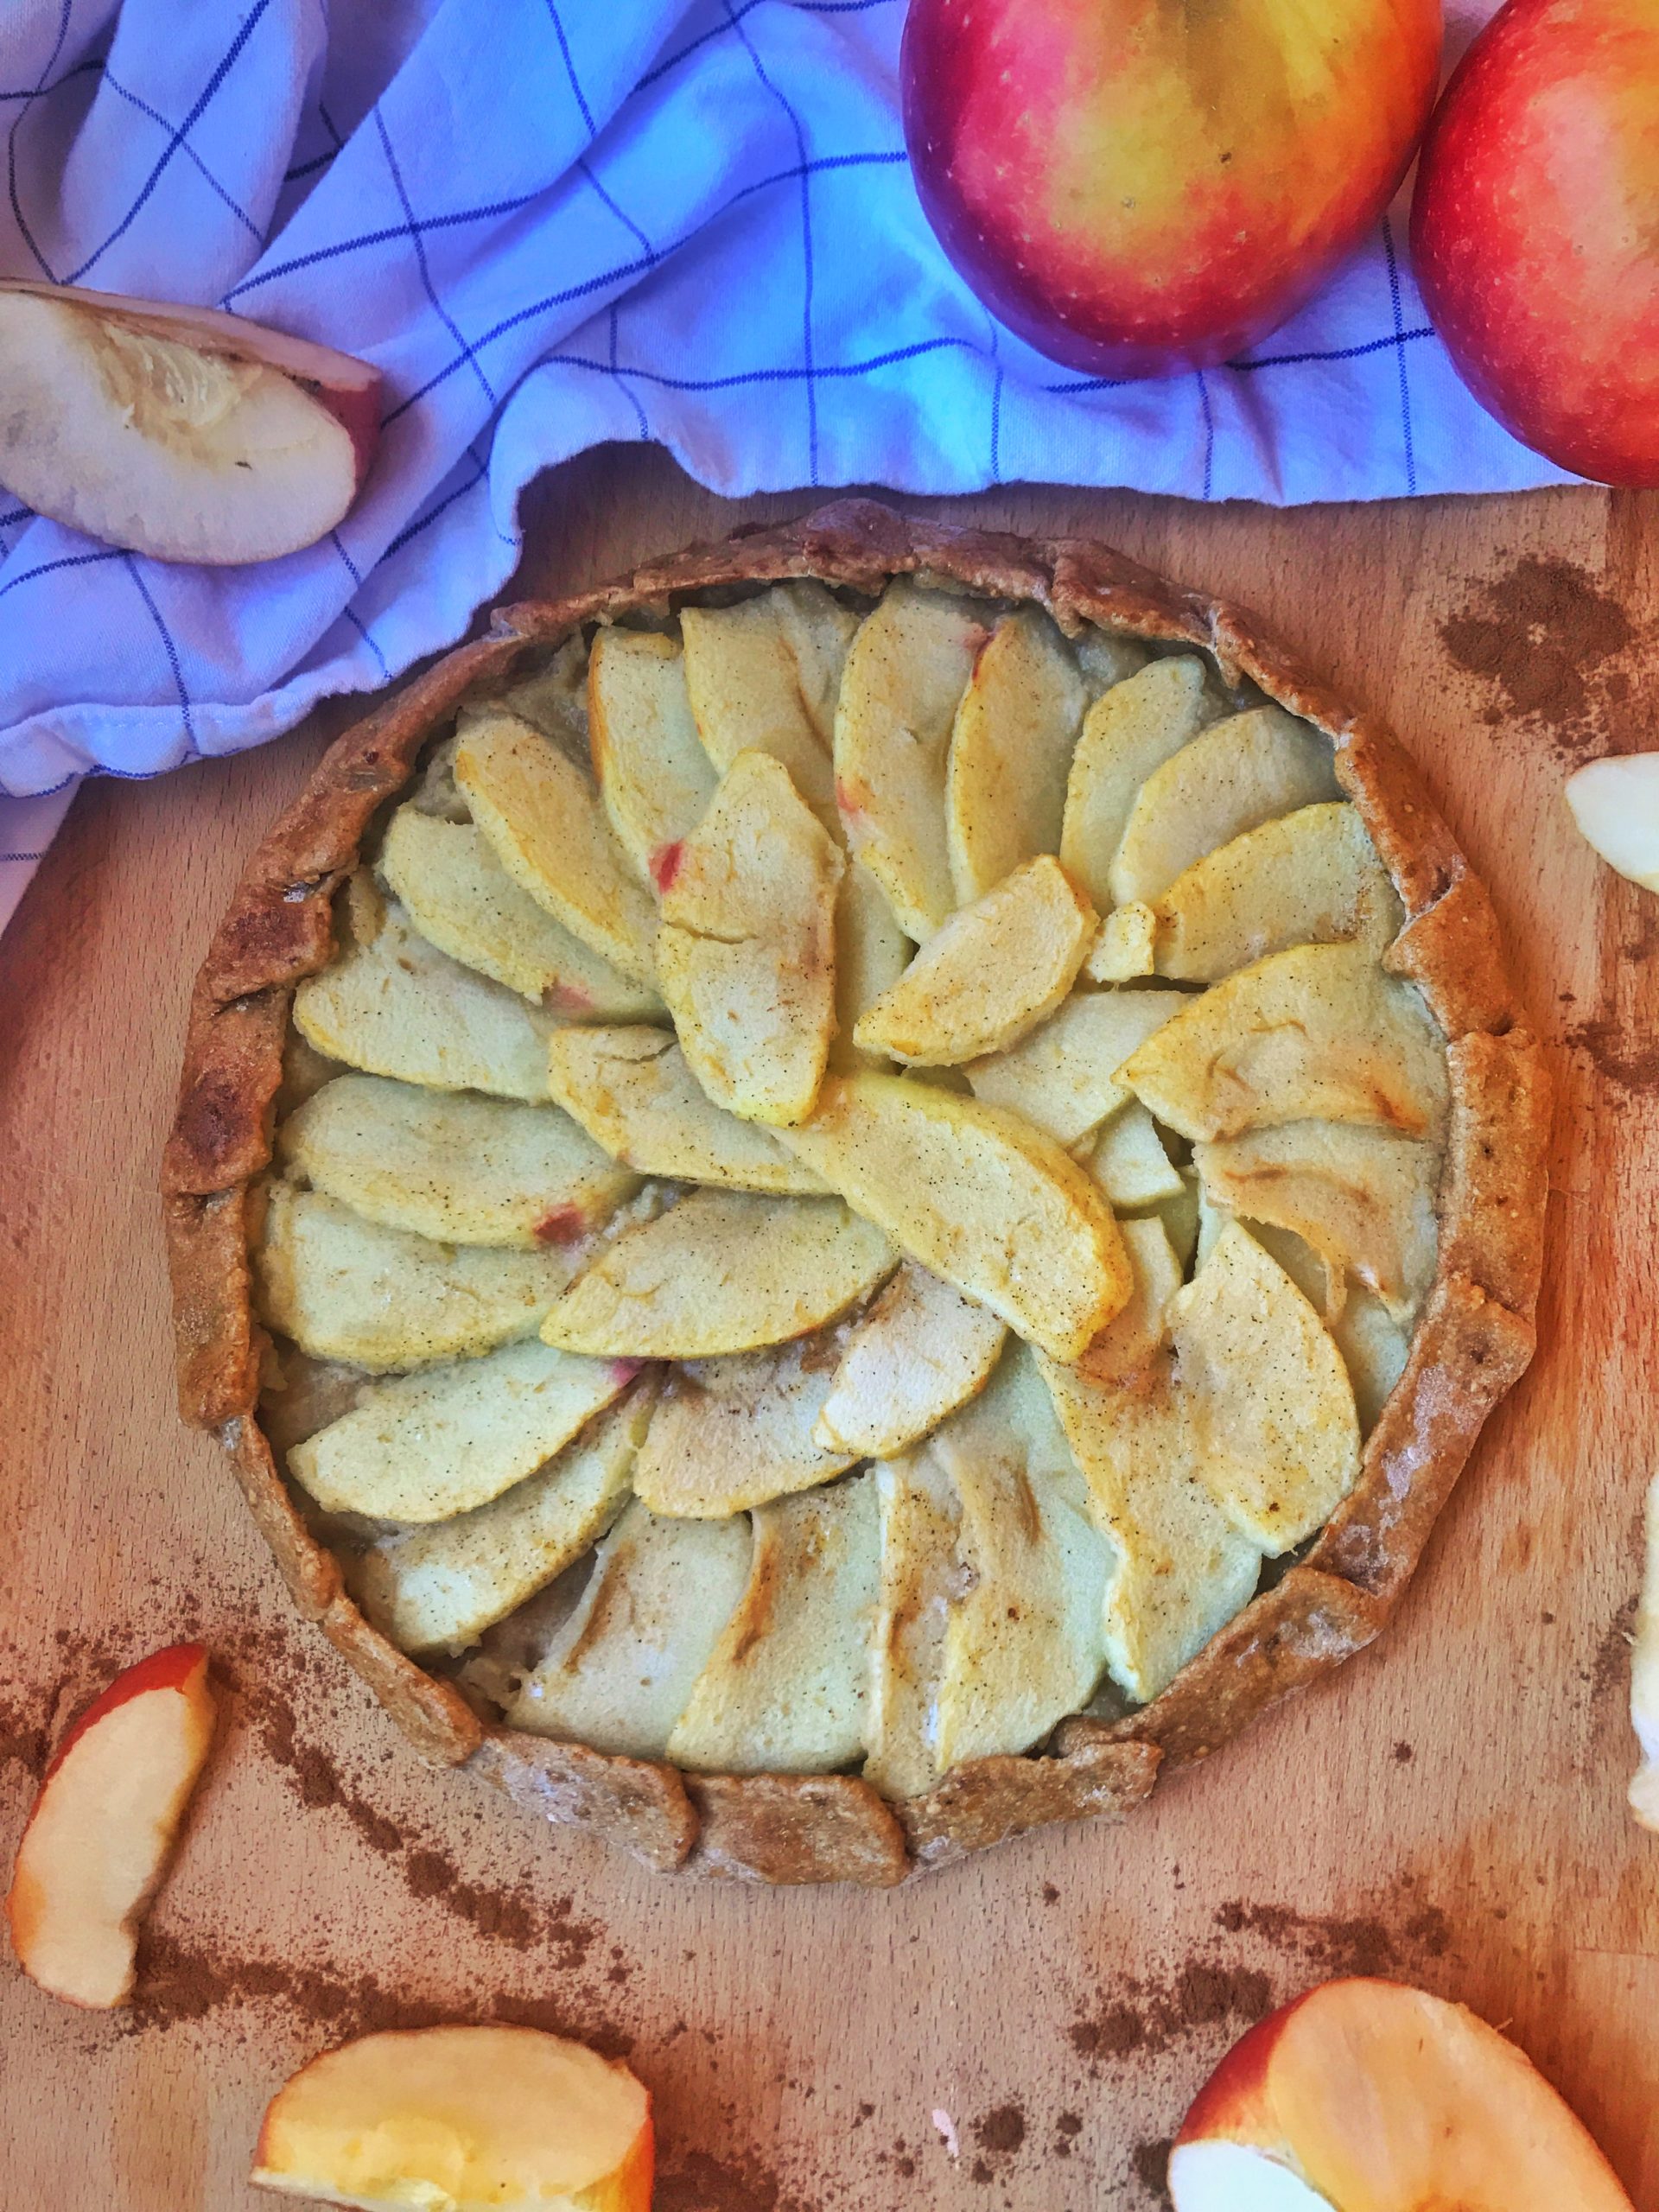 You are currently viewing Tarte aux pommes